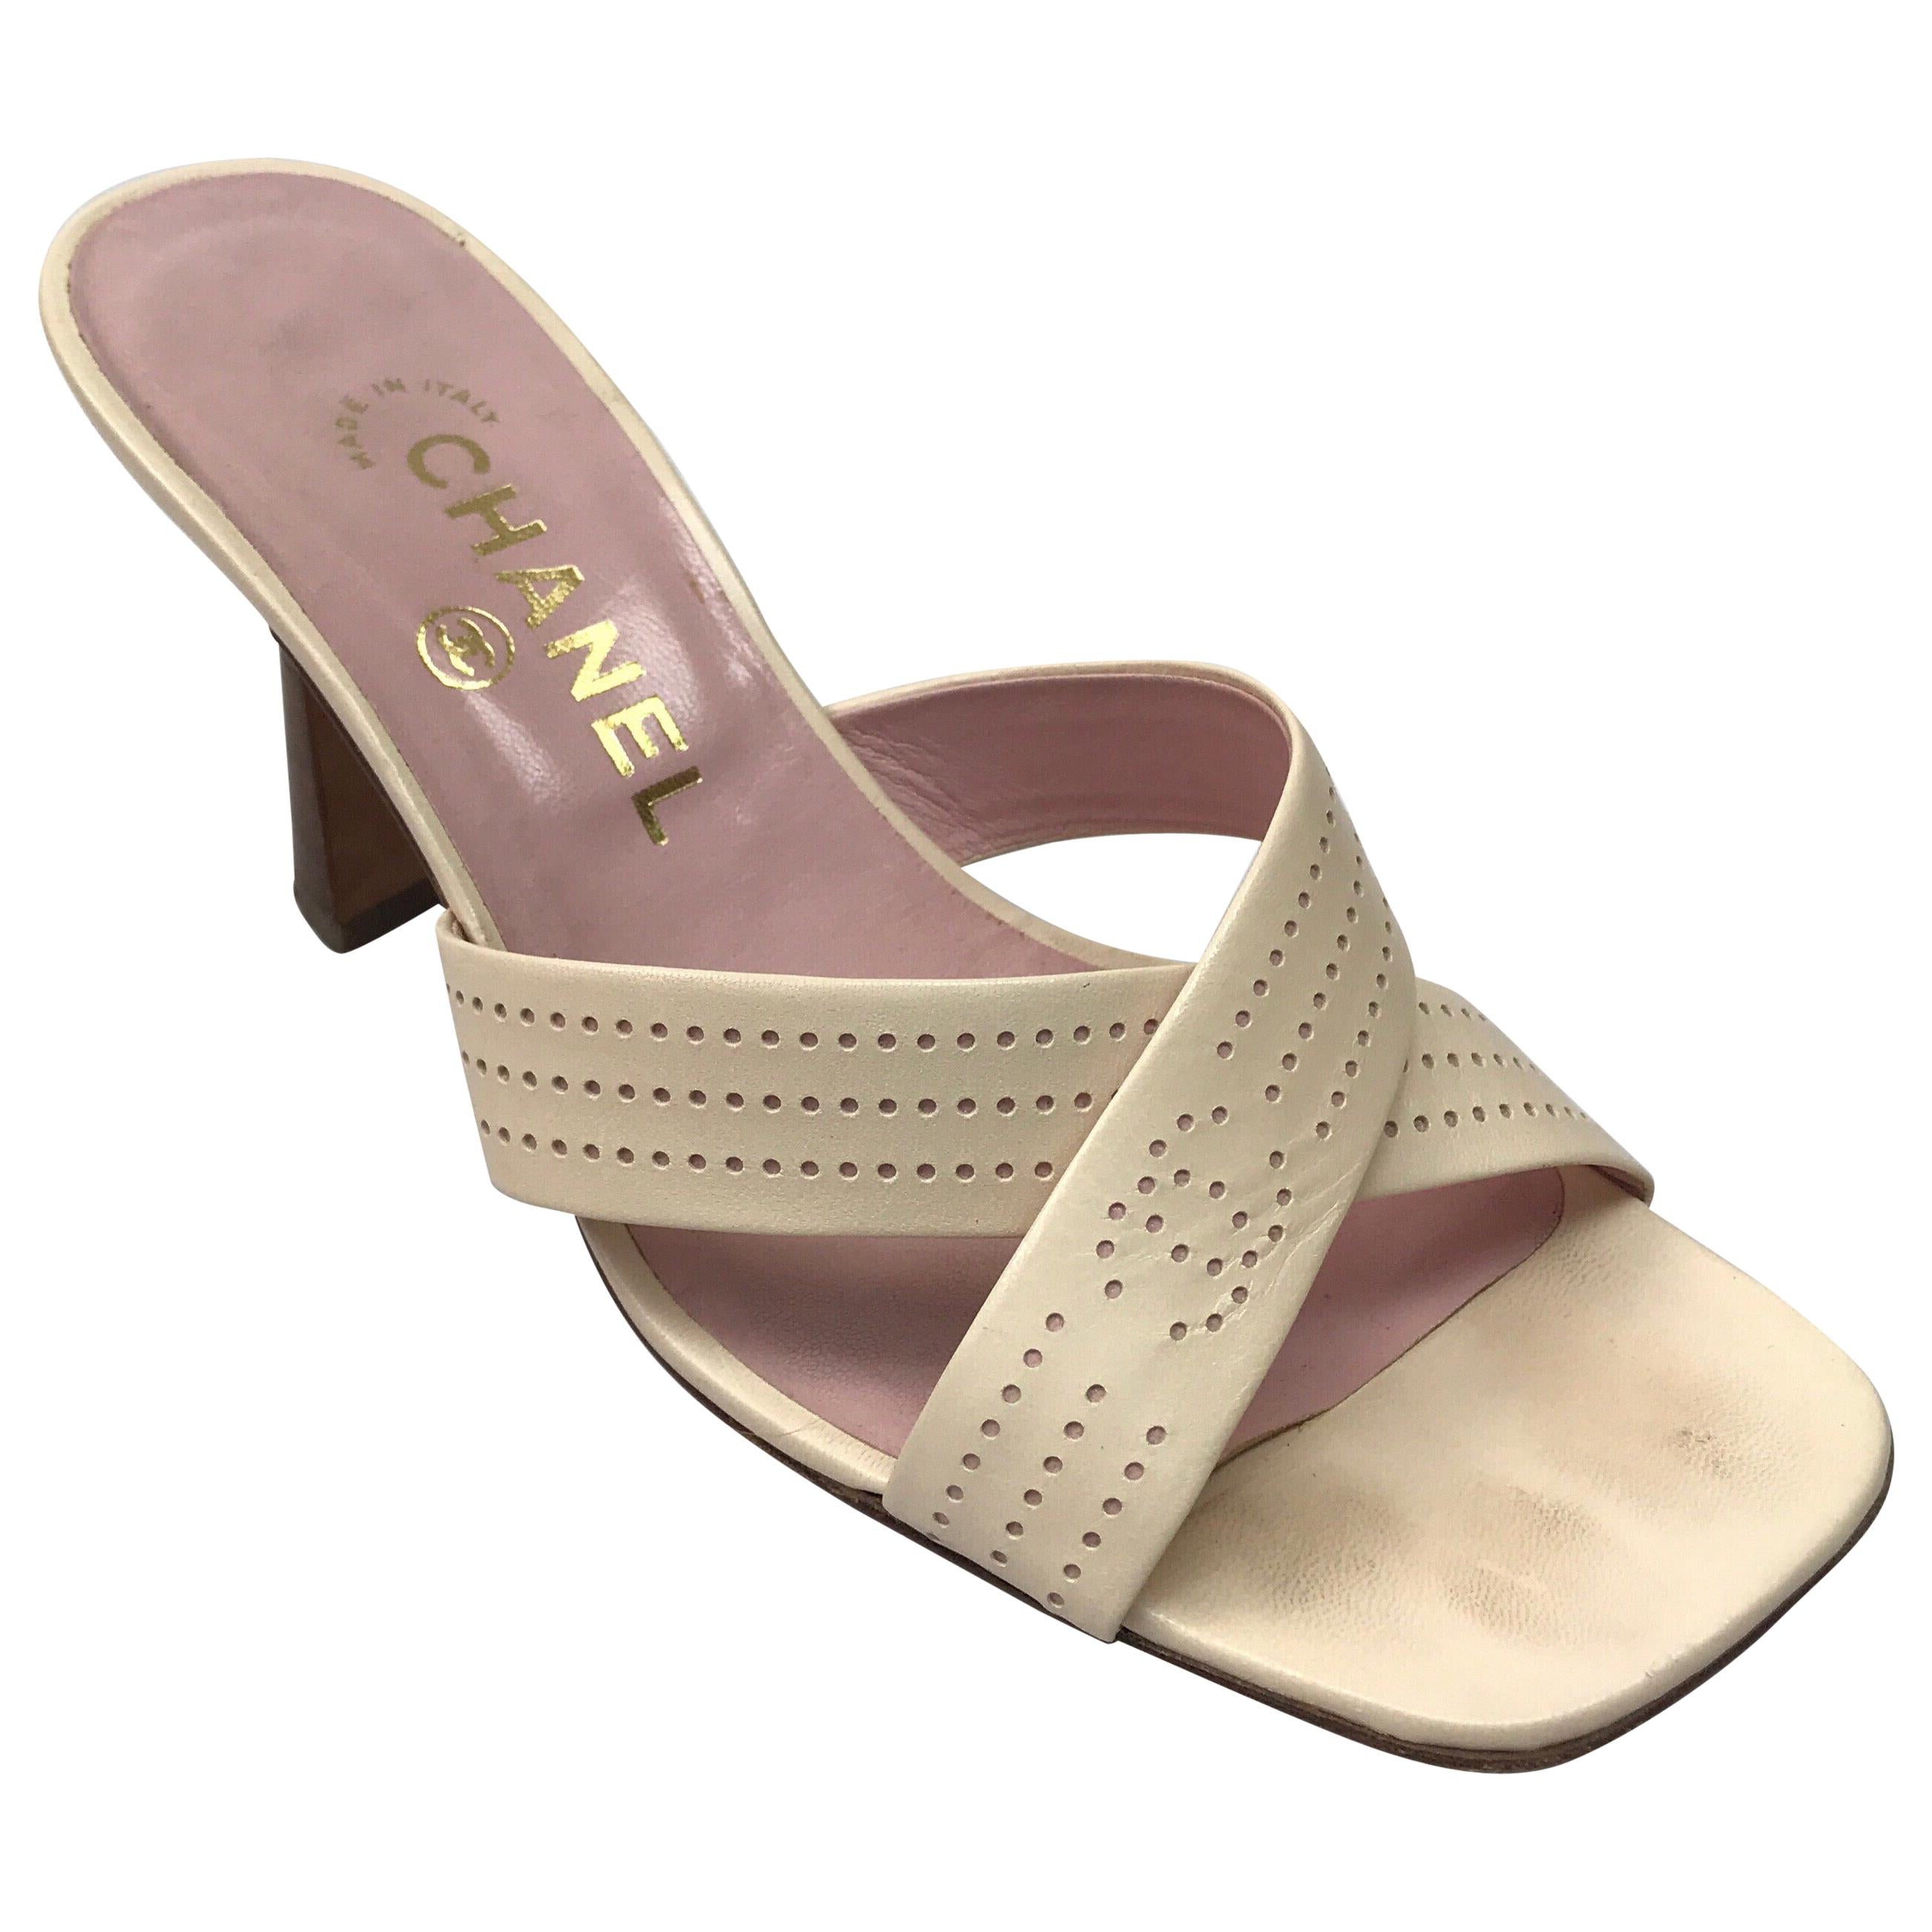 Chanel Pale Pink Perforated Leather Strappy Sandal - 37